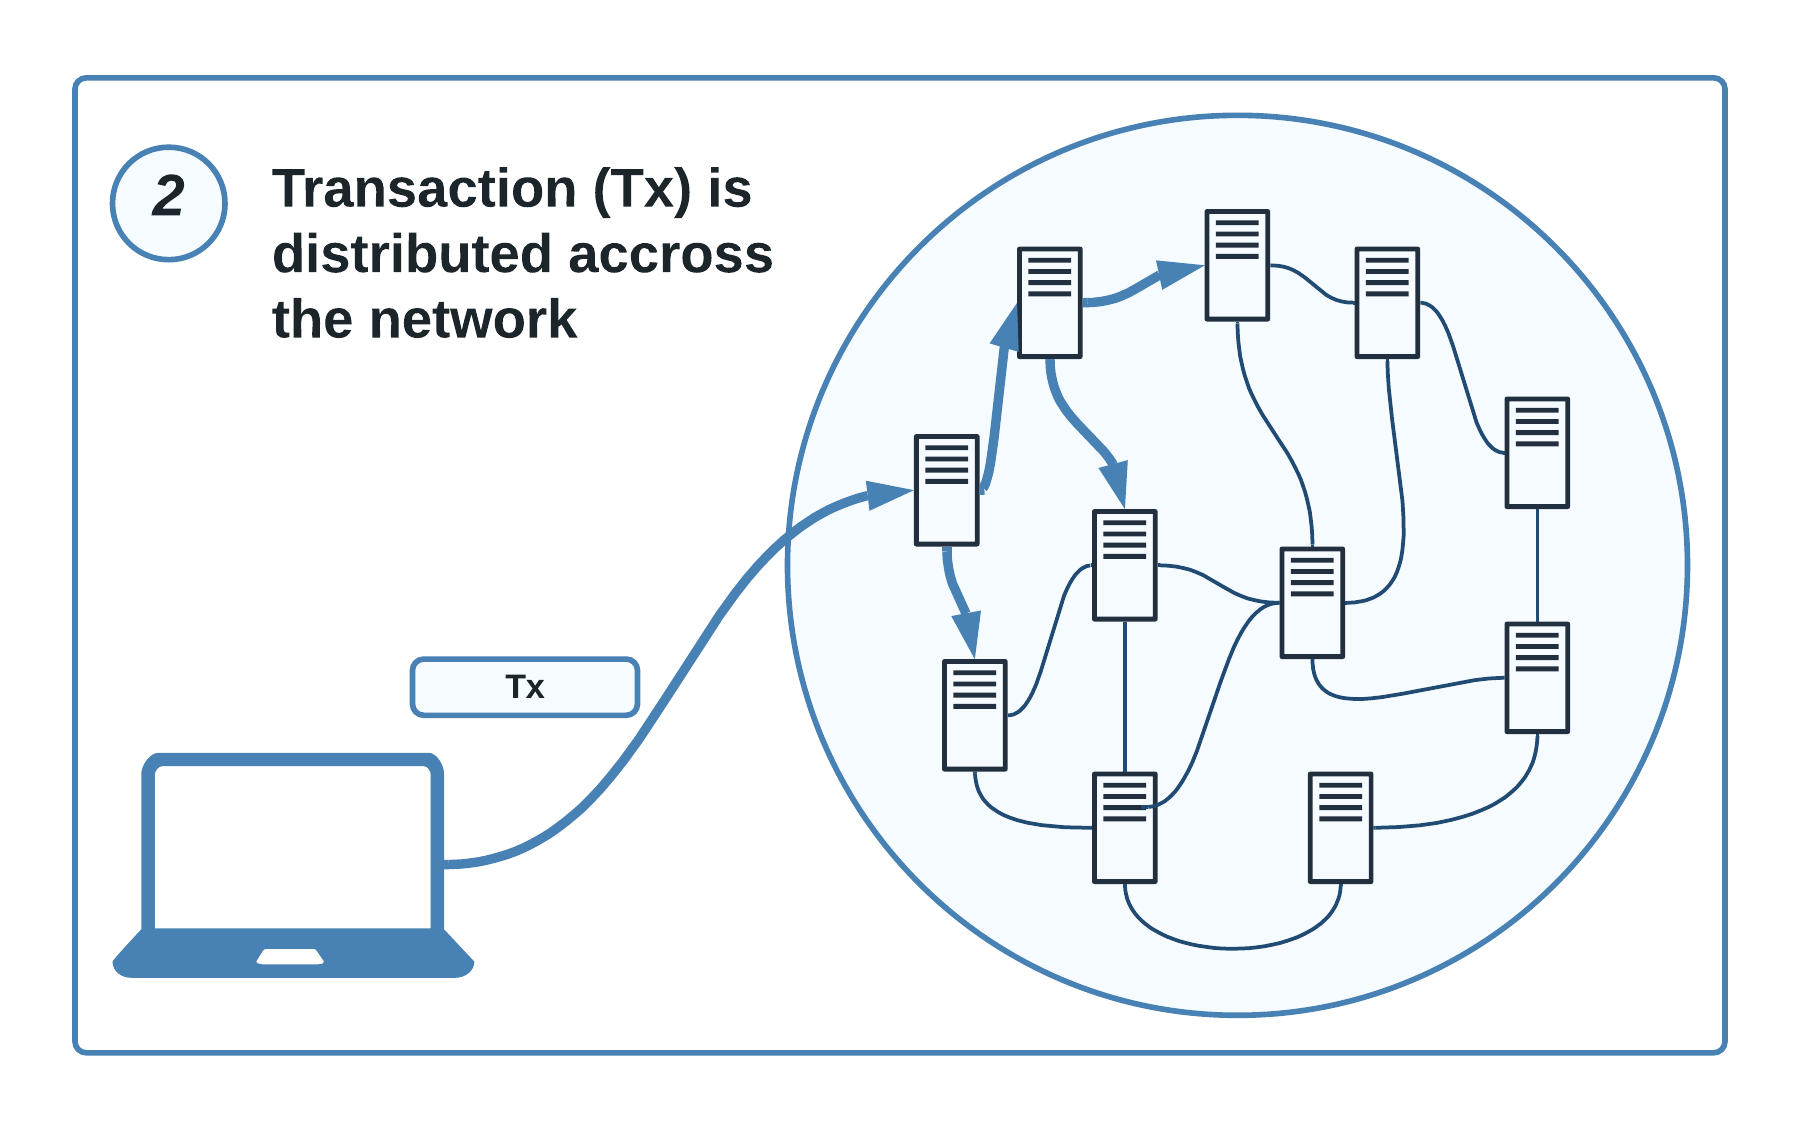 Transactions are being distributed across Nodes